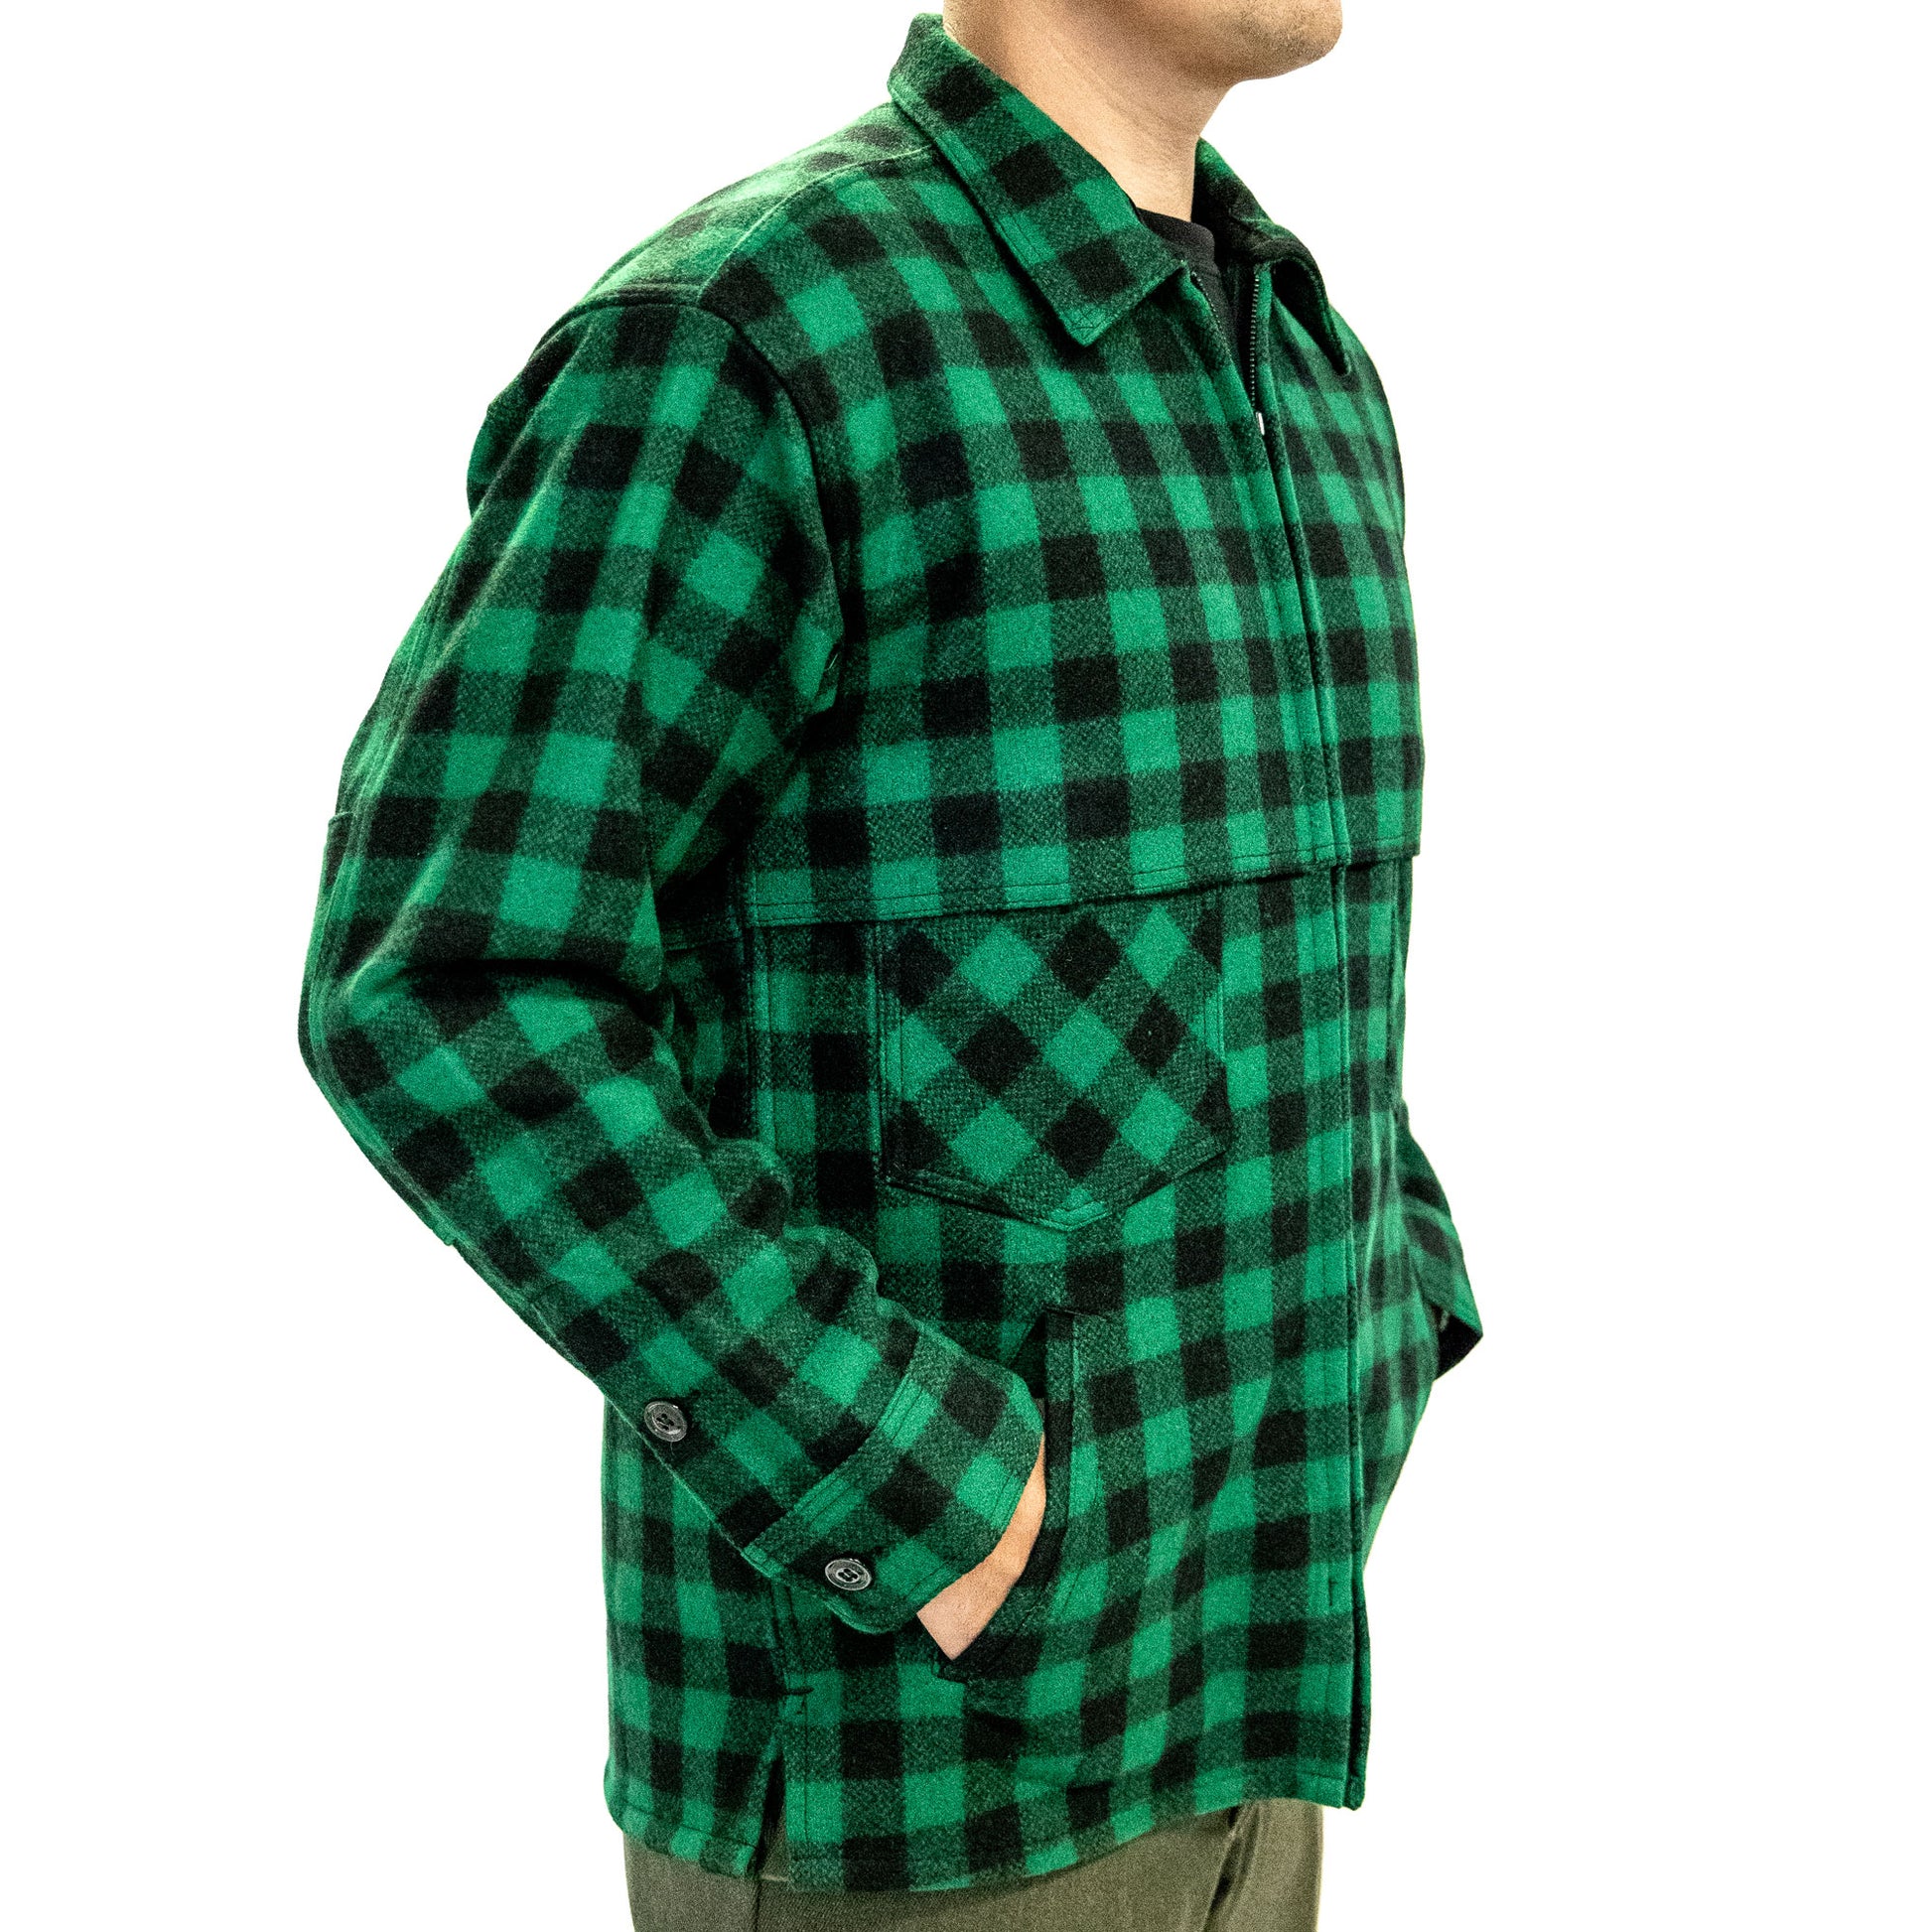 Johnson Woolen Mills northwoods x 1842 green and black buffalo check jac shirt on side view of model with hands in pockets